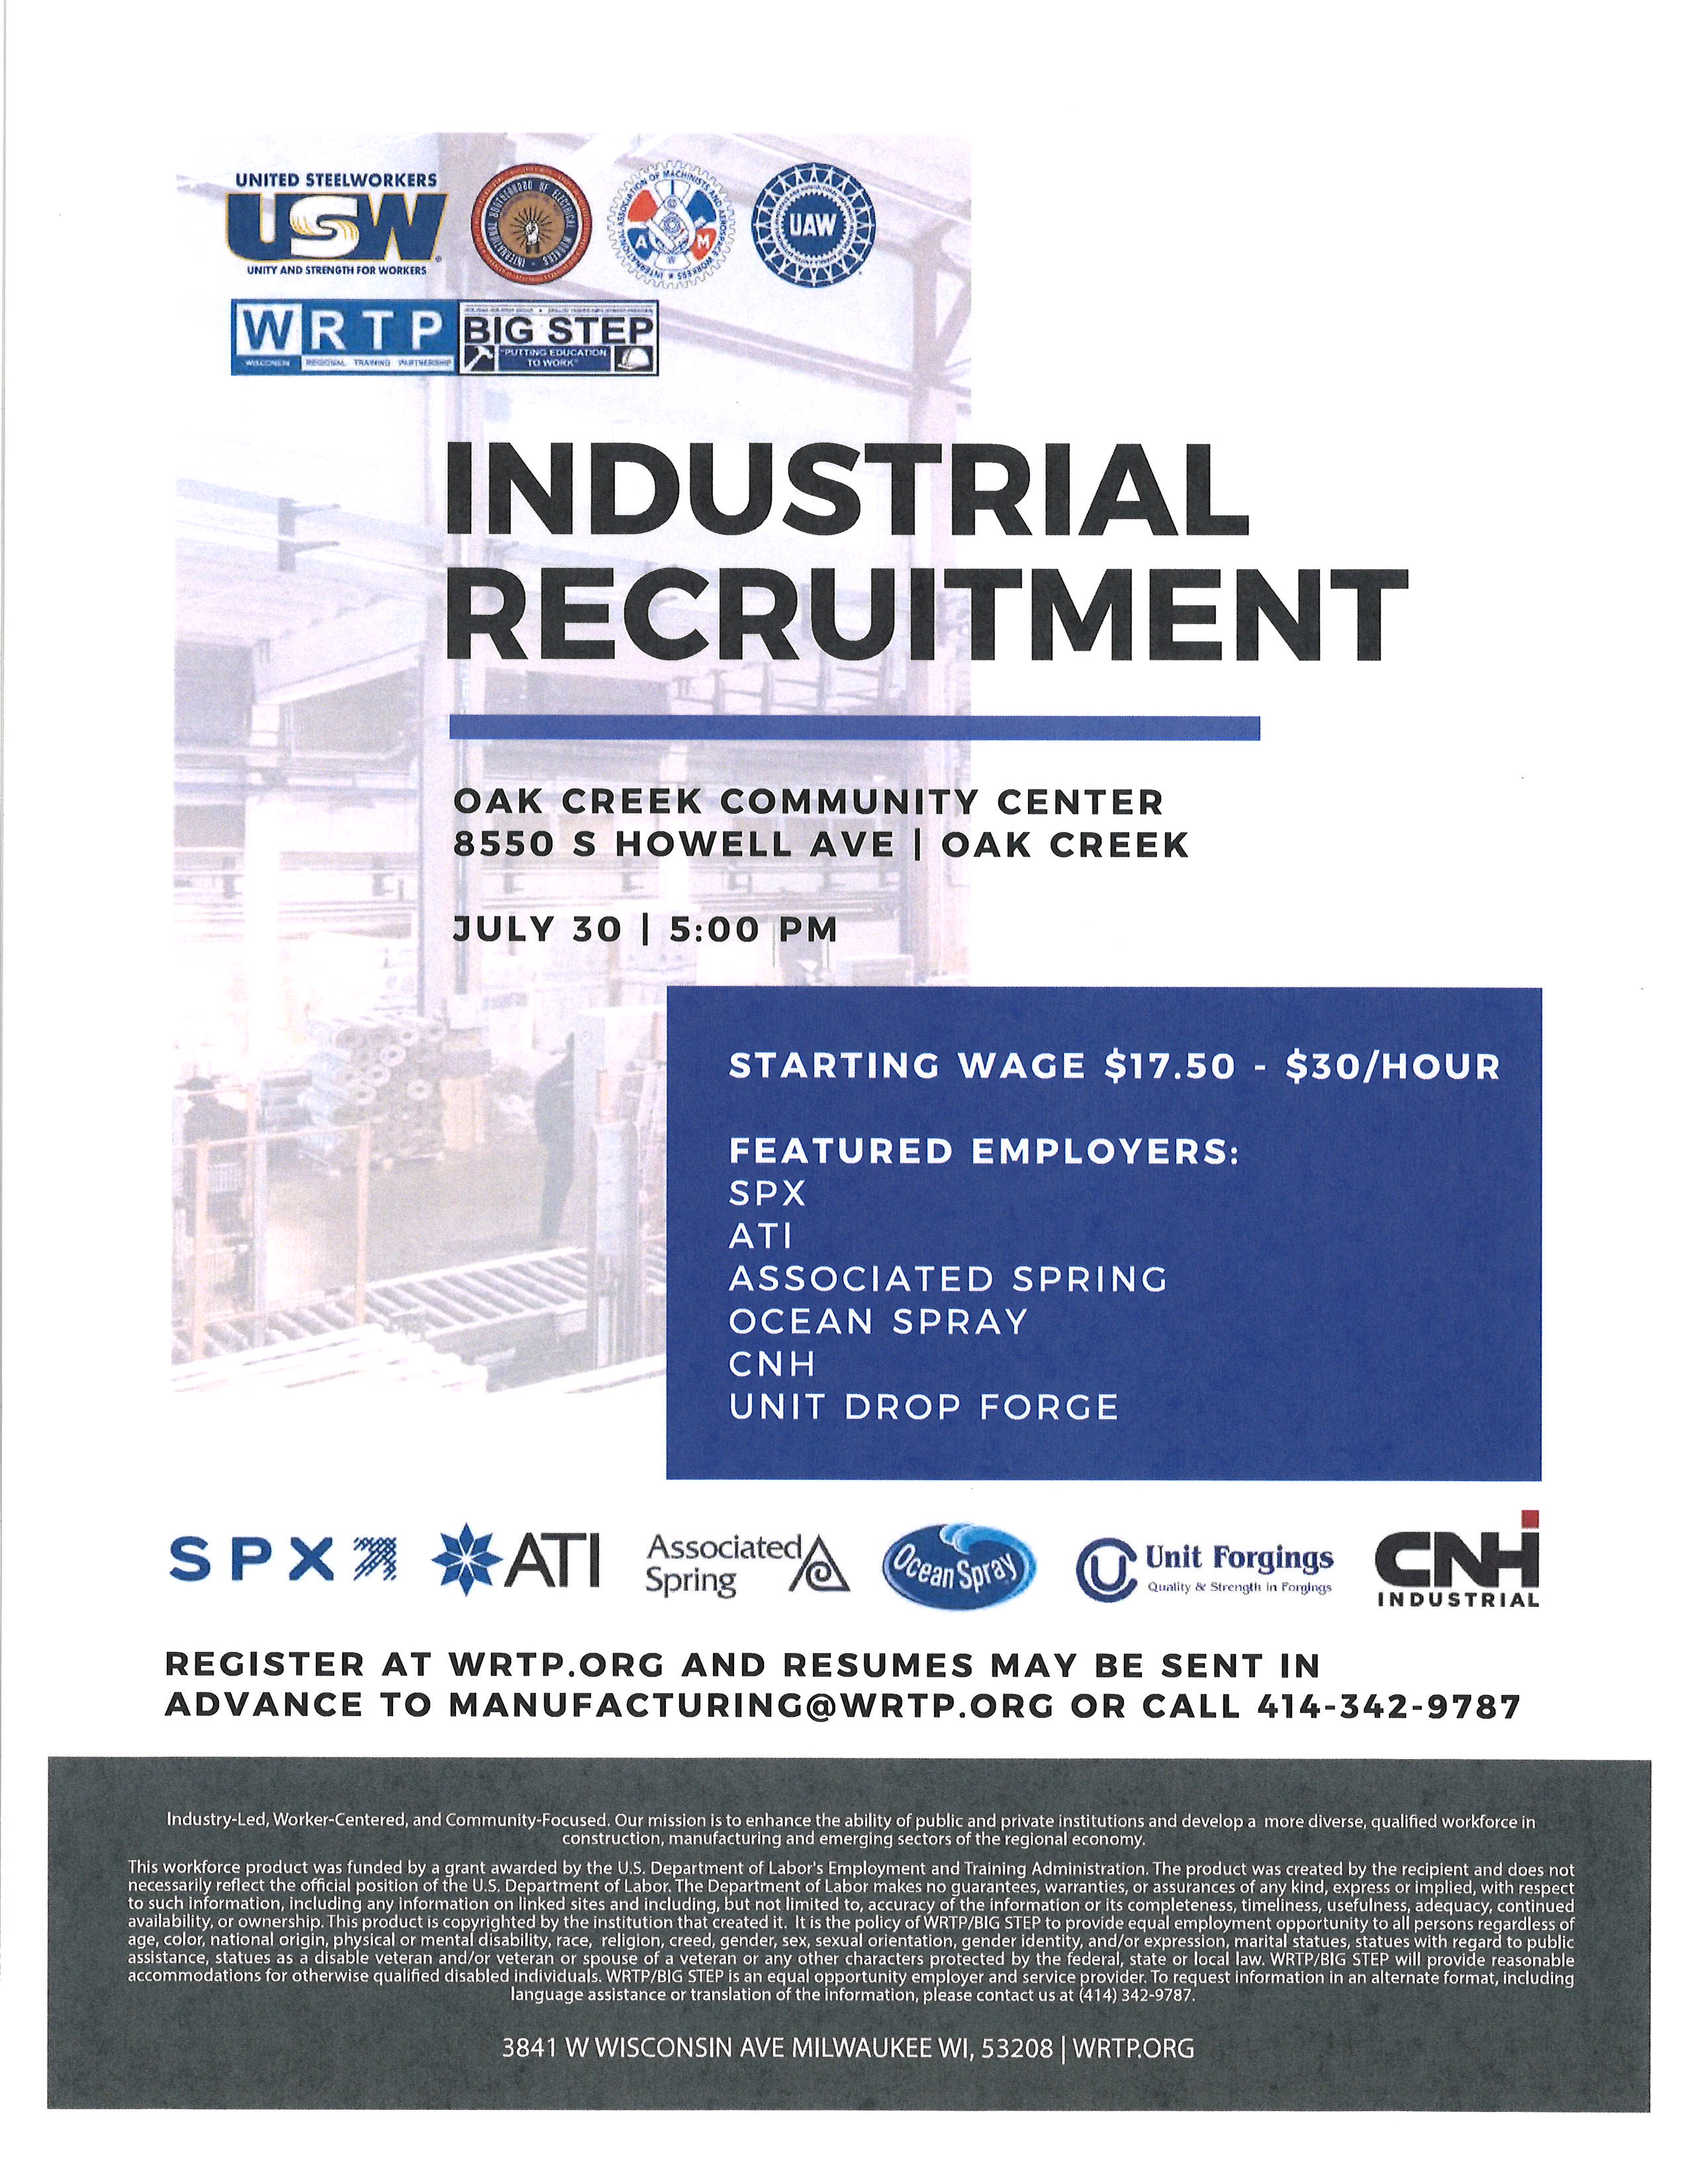 Industrial Recruitment- July 30